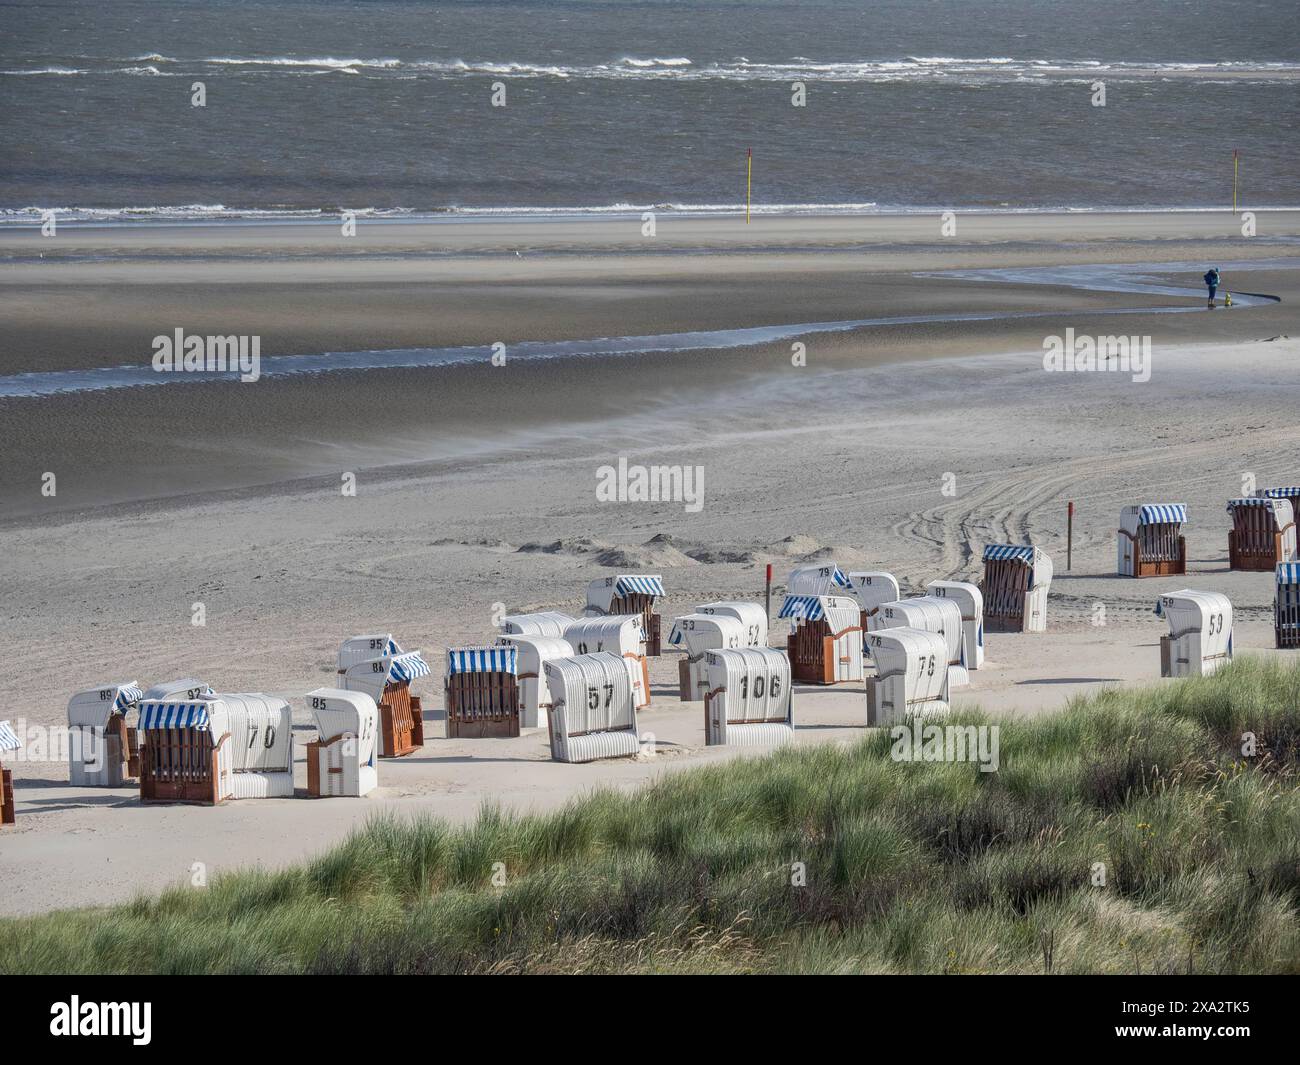 A beach with several beach chairs, in the background the sea and a person. Windy and quiet, Spiekeroog, Germany Stock Photo